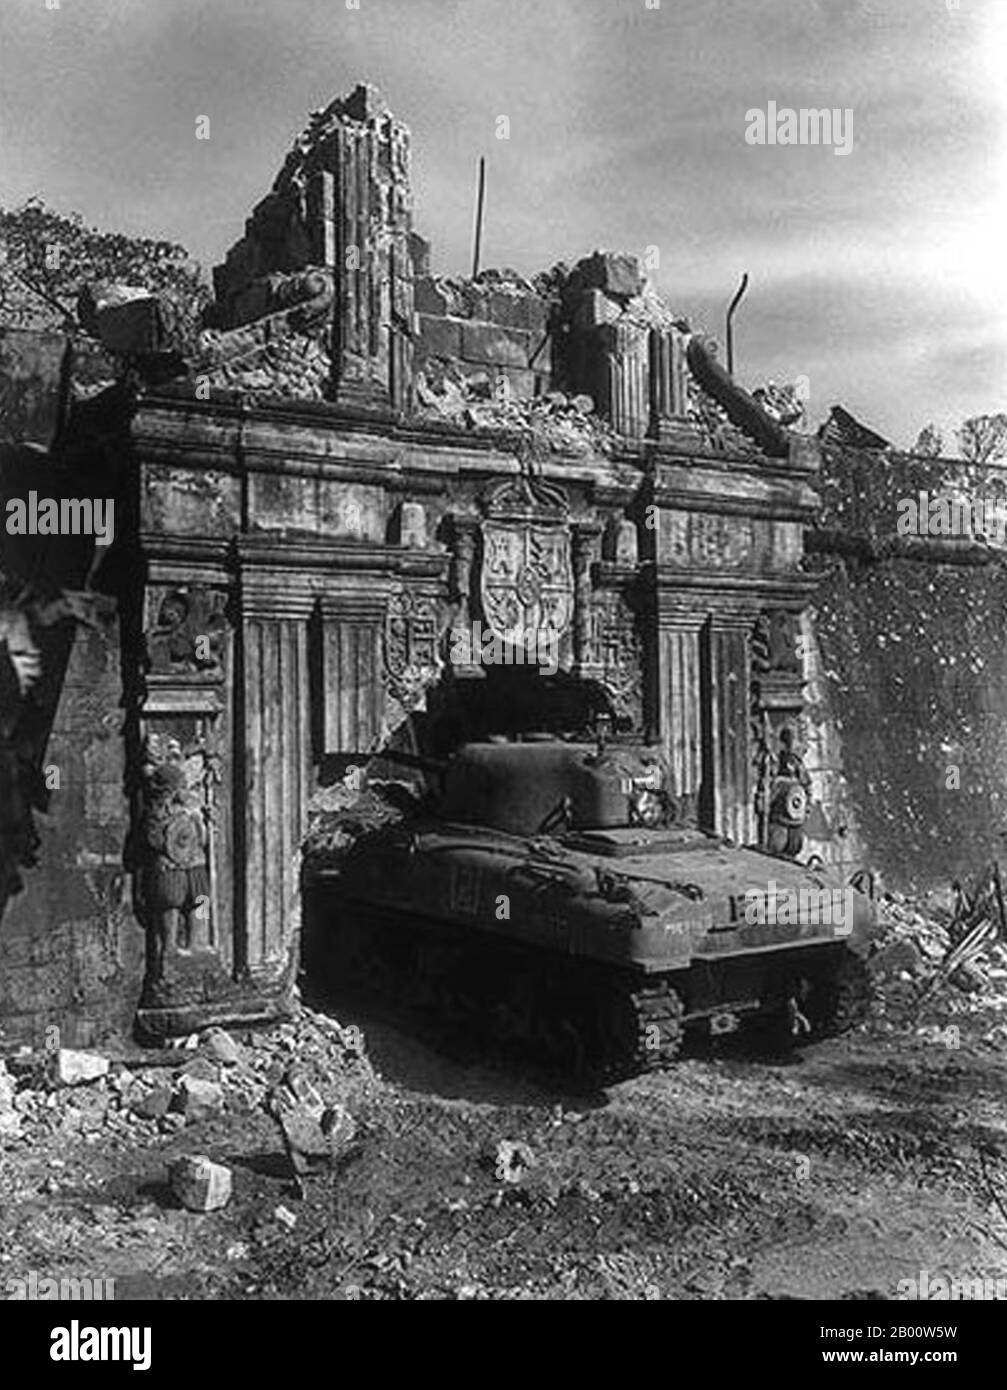 Philippines: A US Army Sherman battle tank in the destroyed gateway to Intramuros, Battle of Manila, 1945.  The Battle of Manila from 3 February to 3 March 1945, fought by American, Filipino and Japanese  forces, was part of the Philippines' 1945 campaign. The one-month battle, which culminated in a terrible bloodbath and total devastation of the city, was the scene of the worst urban fighting in the Pacific theater, and ended almost three years of Japanese military occupation in the Philippines (1942–1945). The city's capture was marked as General Douglas MacArthur's key to victory. Stock Photo